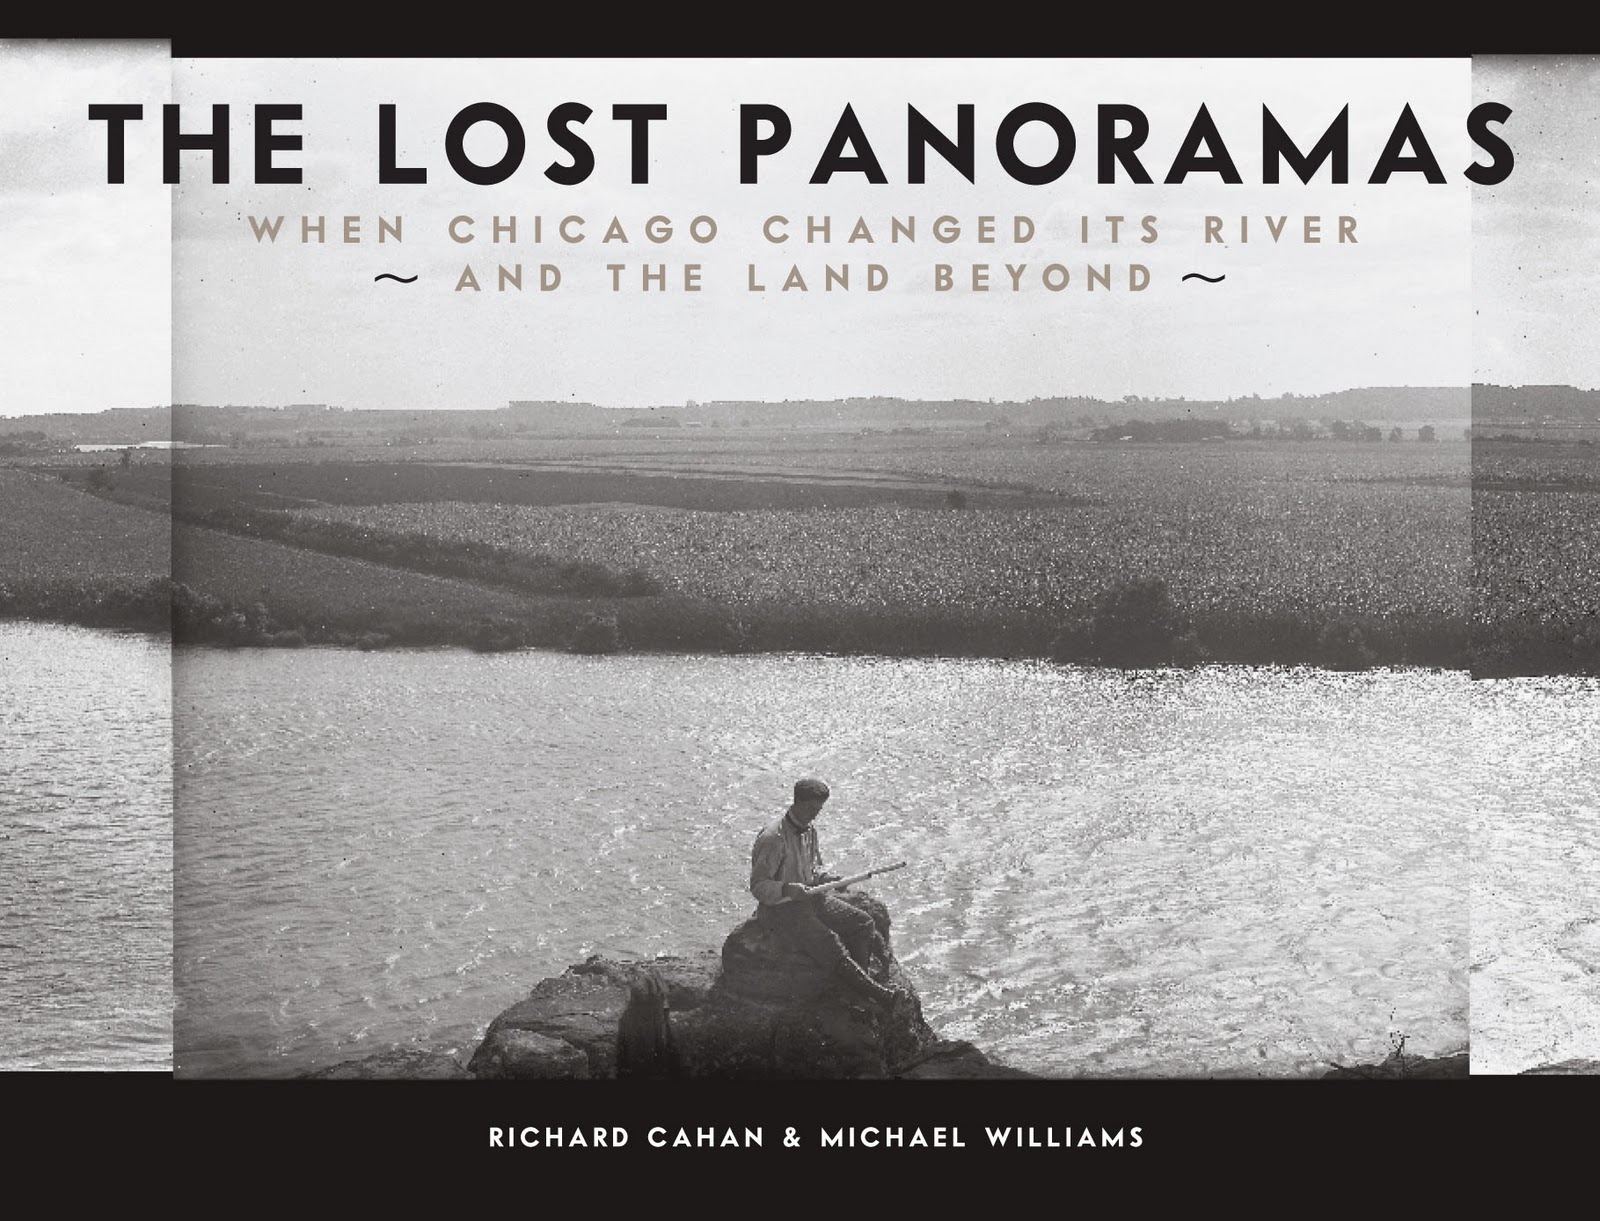 The Lost Panoramas: When Chicago Changed its River and the Land Beyond Michael Williams and Richard Cahan